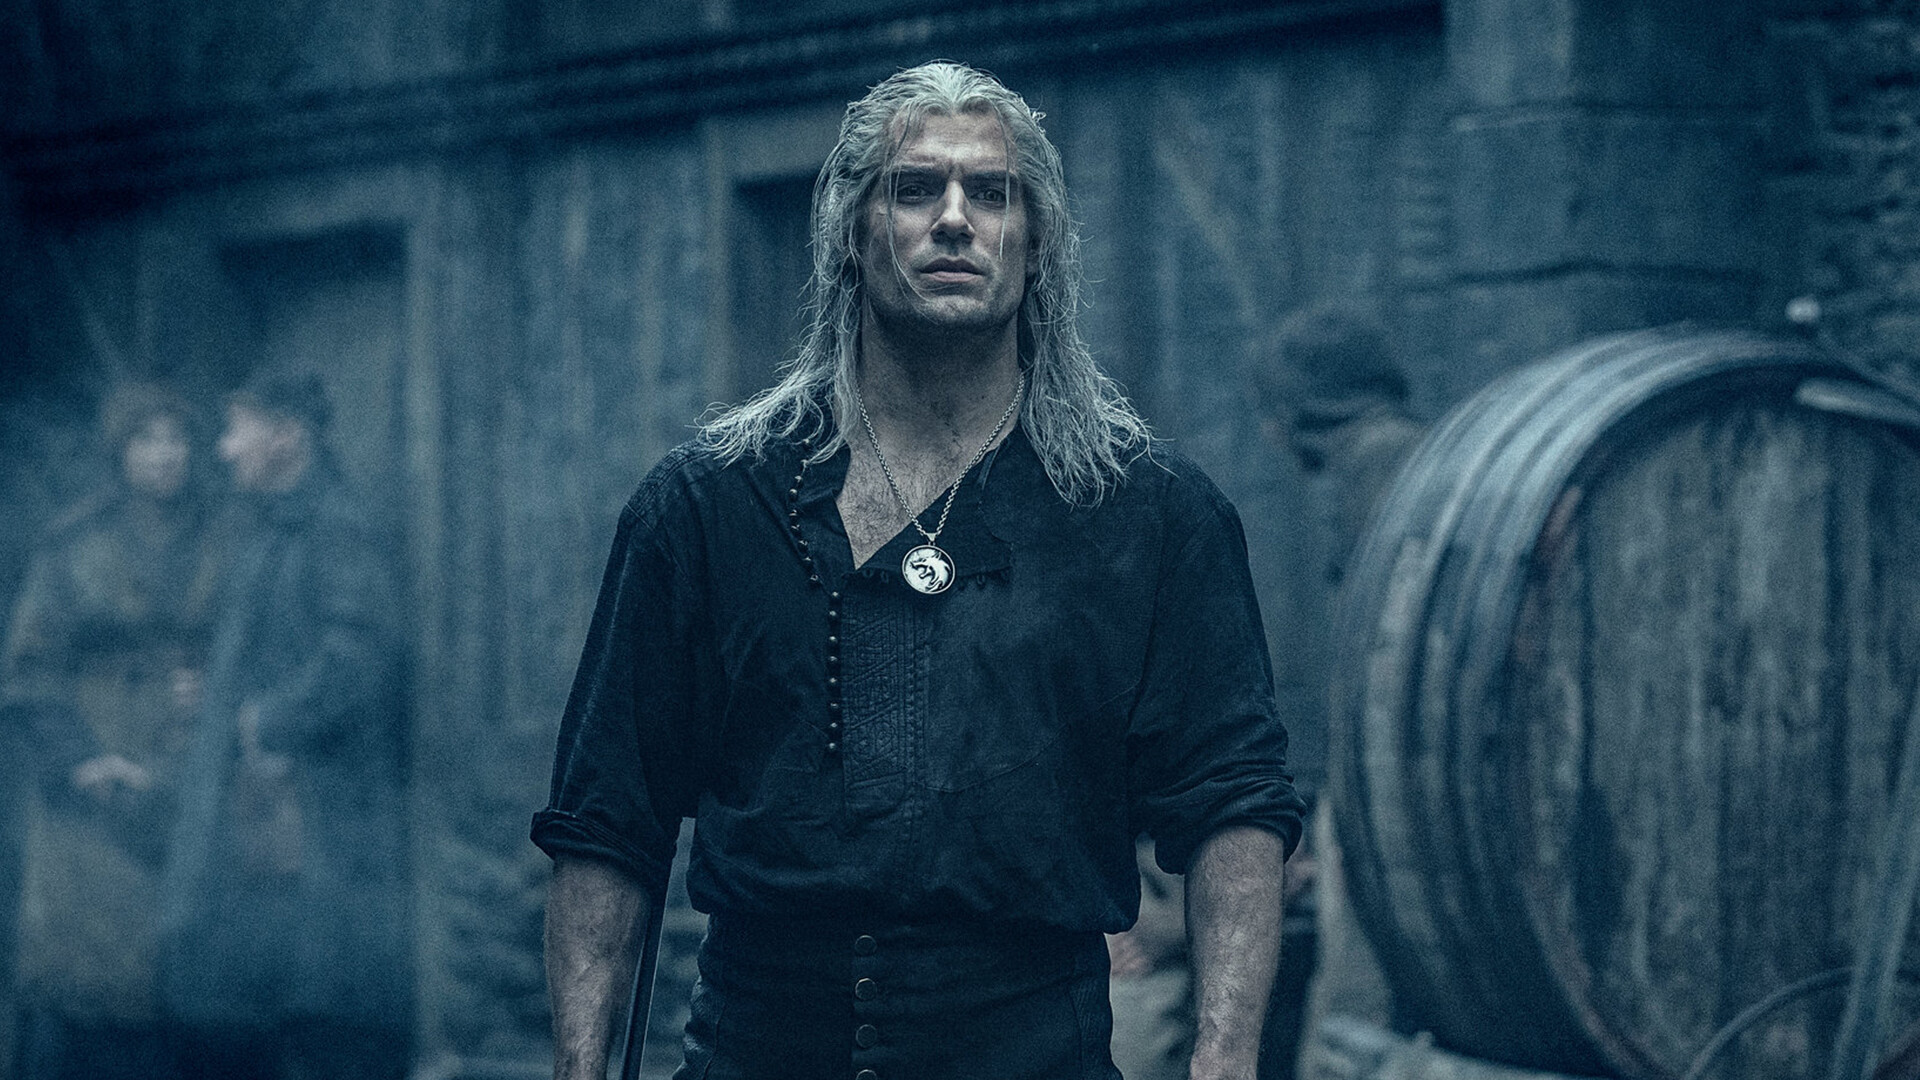 The Witcher Season 2: Netflix, Henry Cavill as Geralt of Rivia, also known as White Wolf. 1920x1080 Full HD Background.